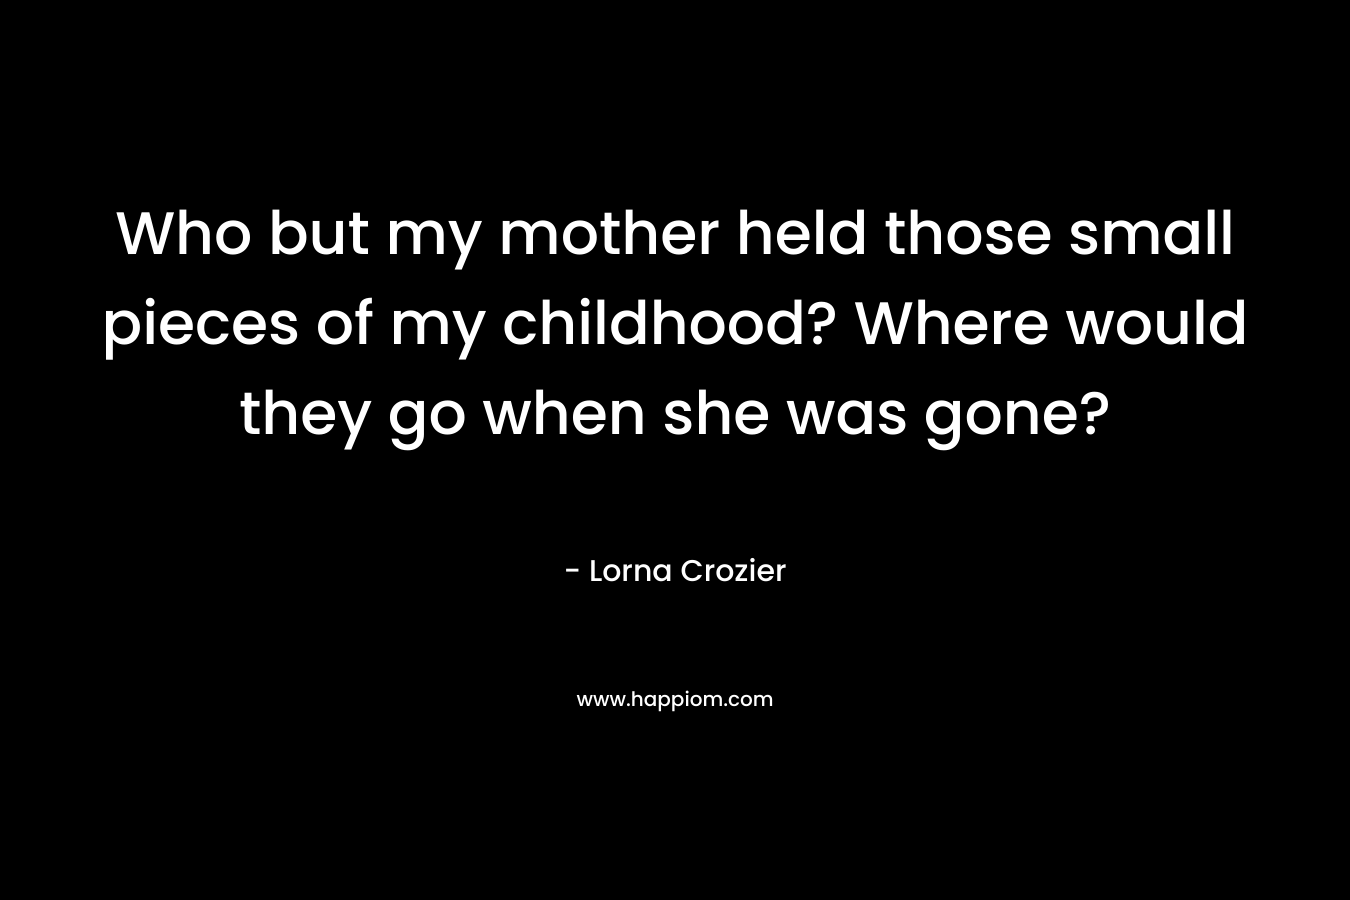 Who but my mother held those small pieces of my childhood? Where would they go when she was gone?